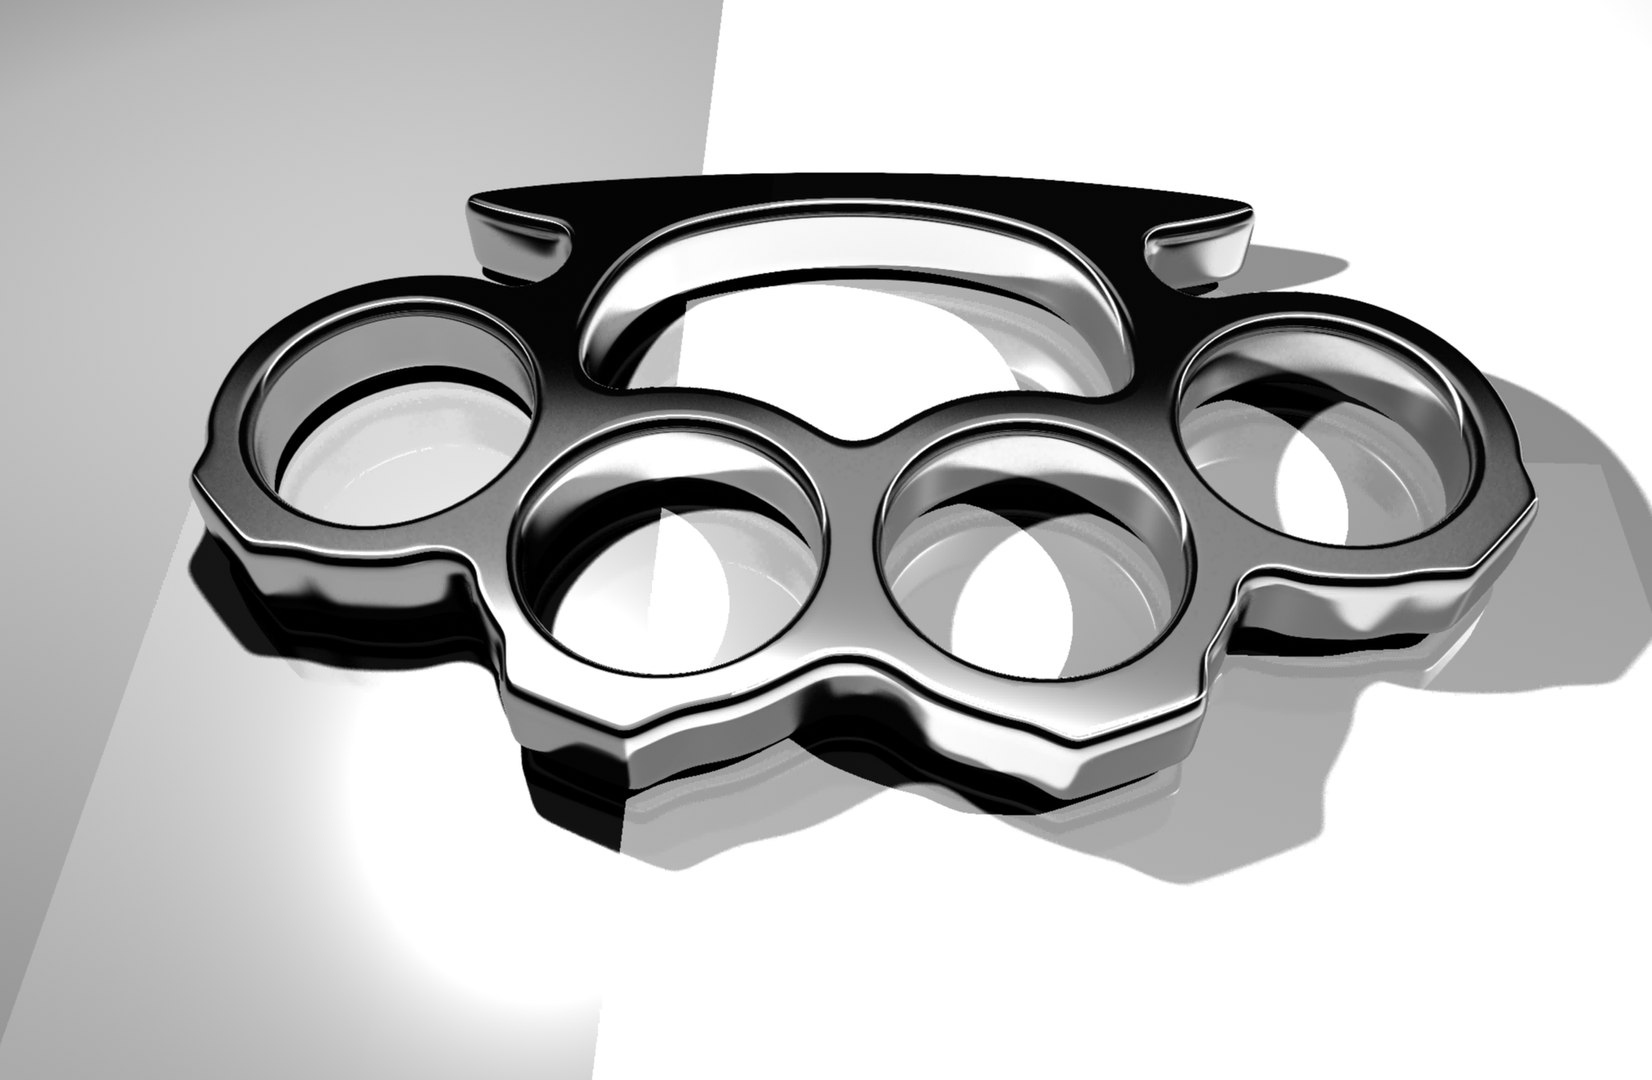 The Coolest Brass Knuckles for Sale Under $10